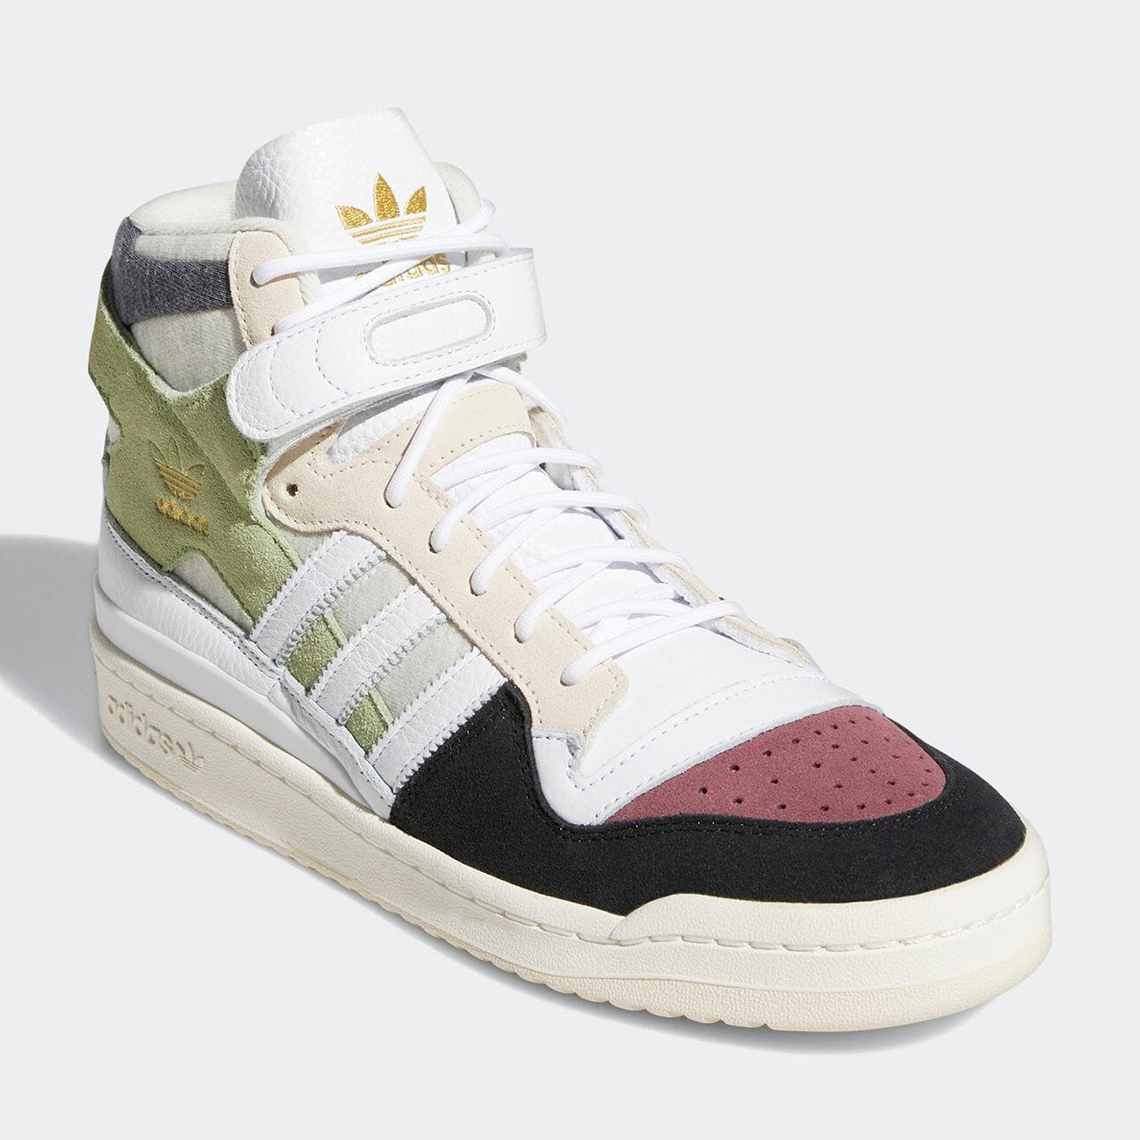 adidas Forum 84 High Multi-Color GY5725 Release Date Info